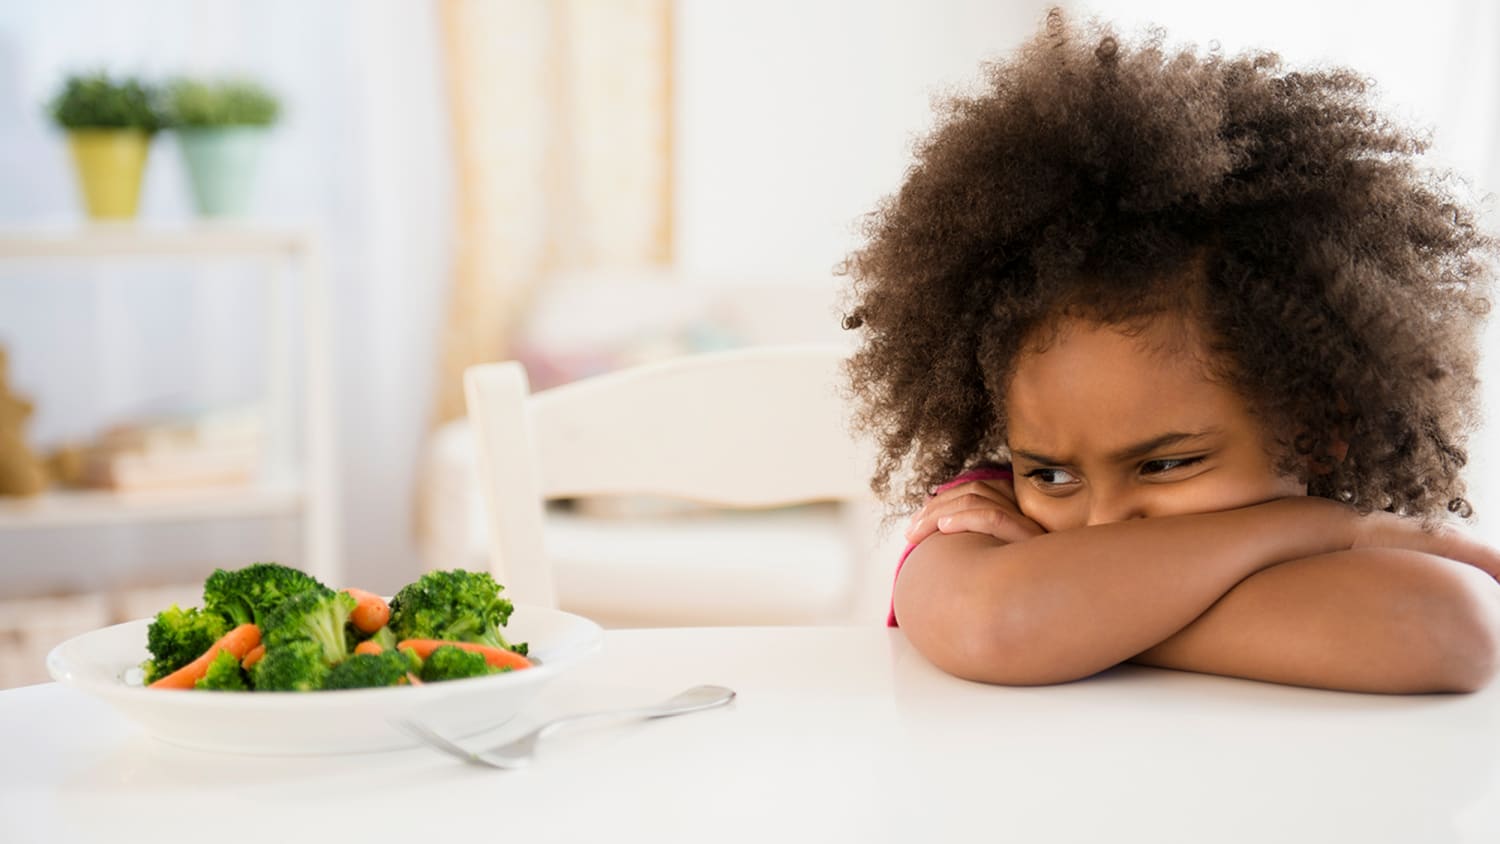 Picky eaters: 10 solutions to the picky eating problem